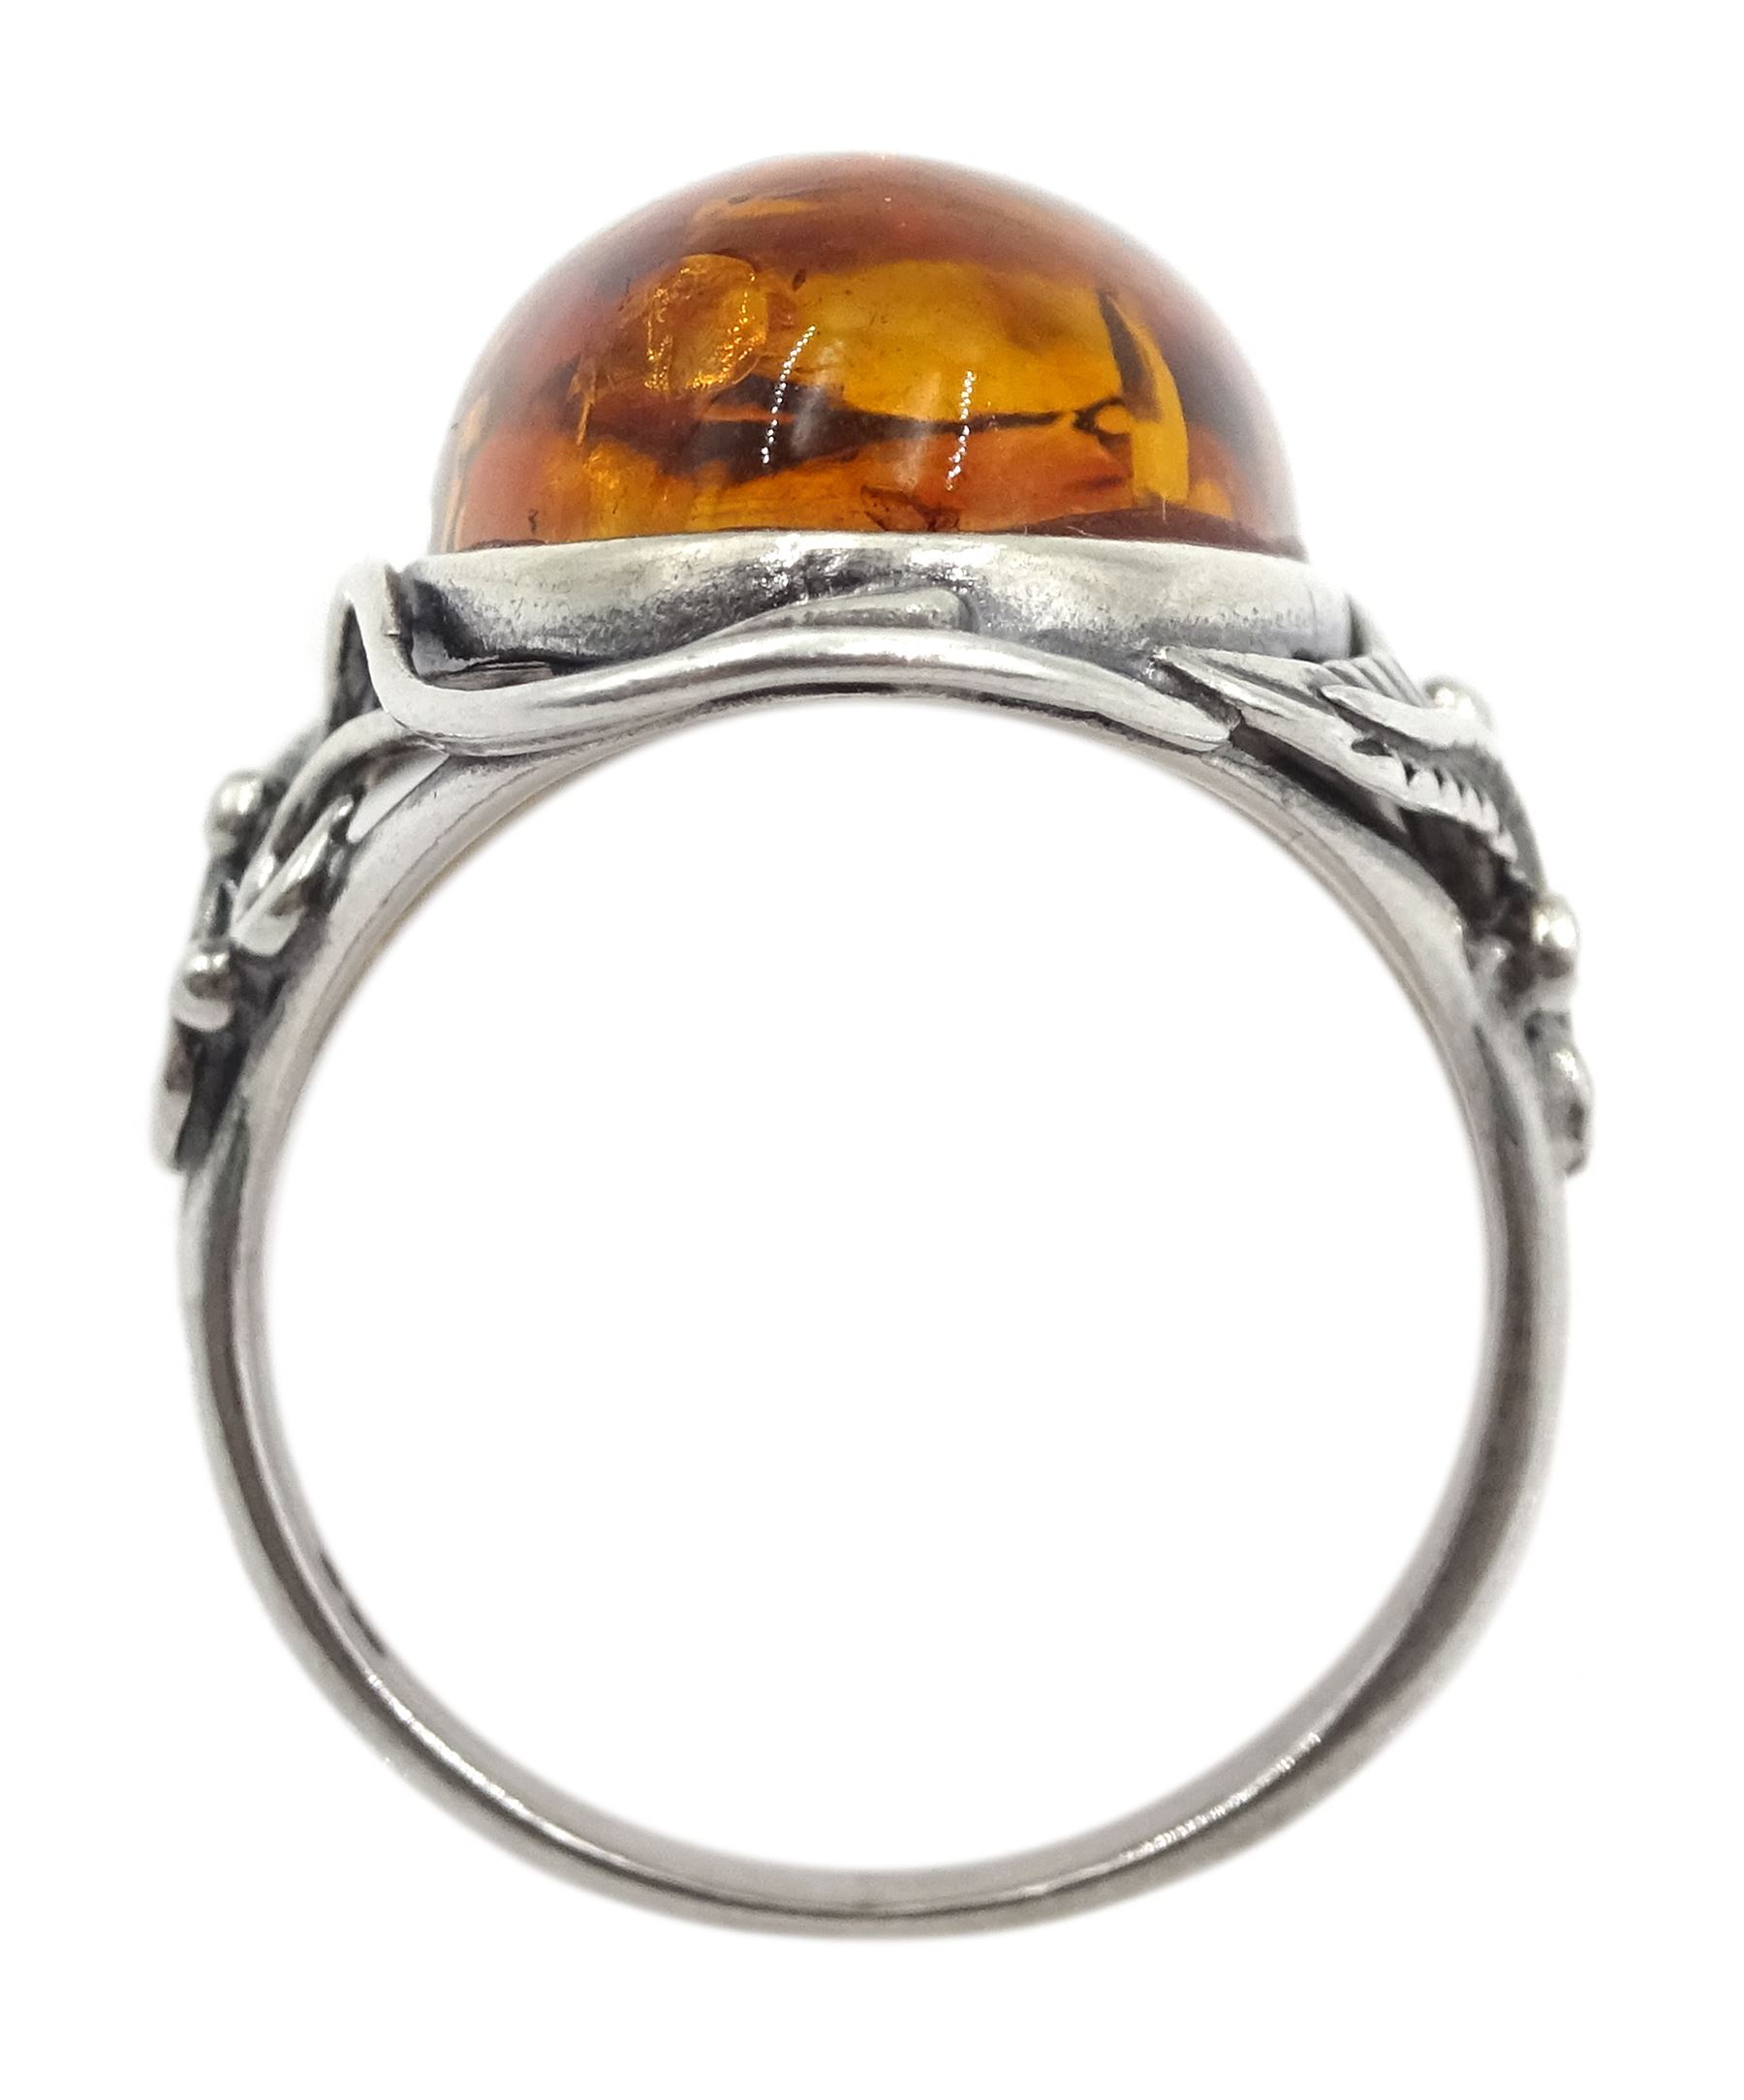 Silver Baltic amber ring - Image 4 of 4